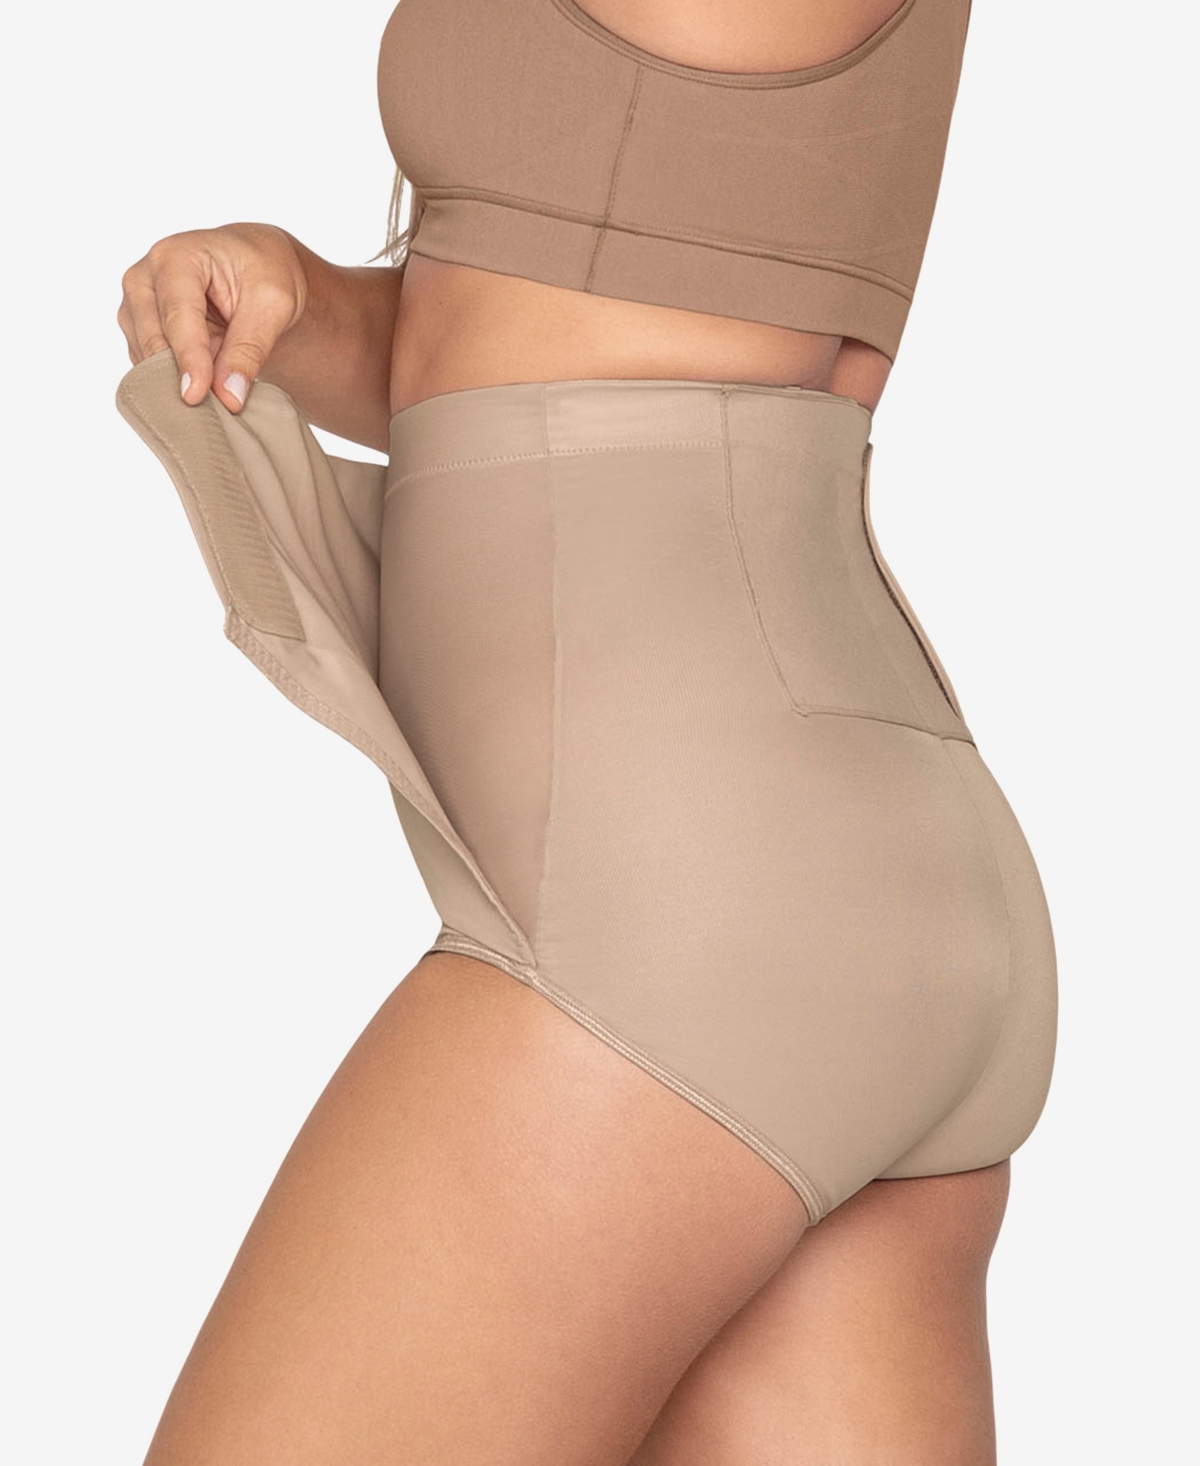 Women's High-Waisted Firm Compression Postpartum Panty with Adjustable Belly Wrap - Light Beige